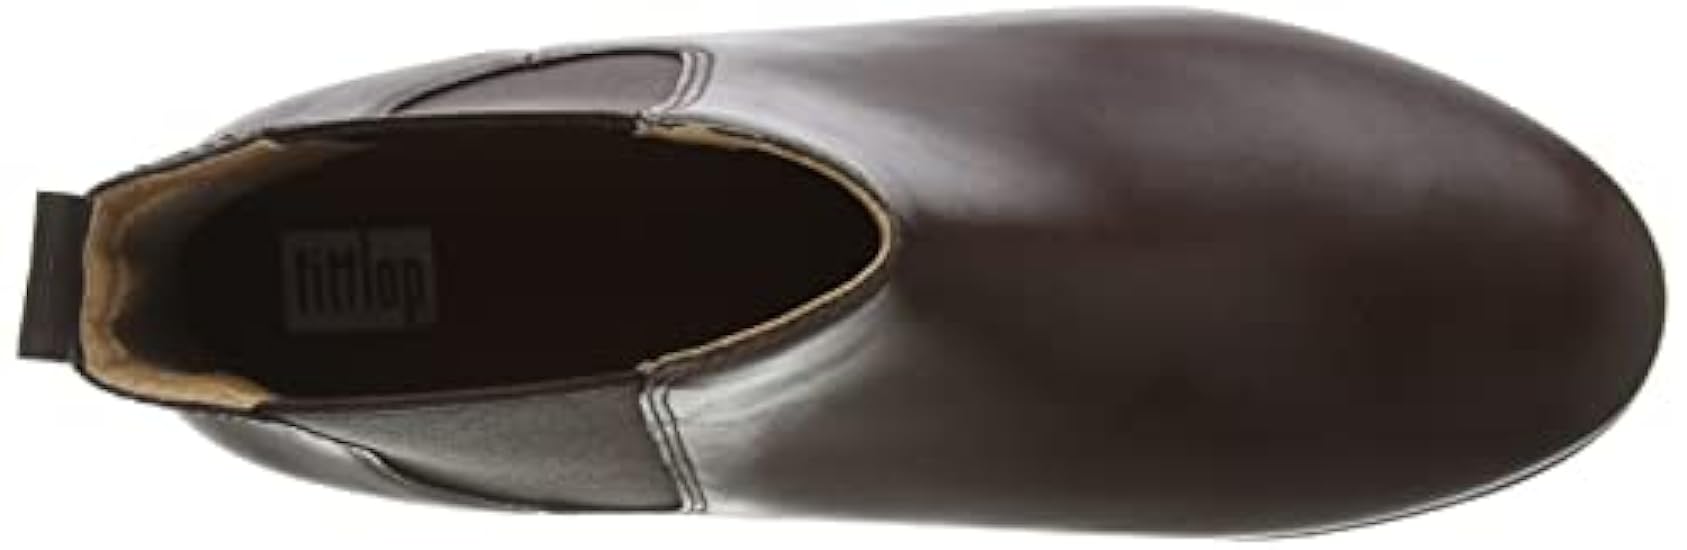 Fitflop Sumi Chelsea Stivale in Pelle Impermeabile, Donna 473884447